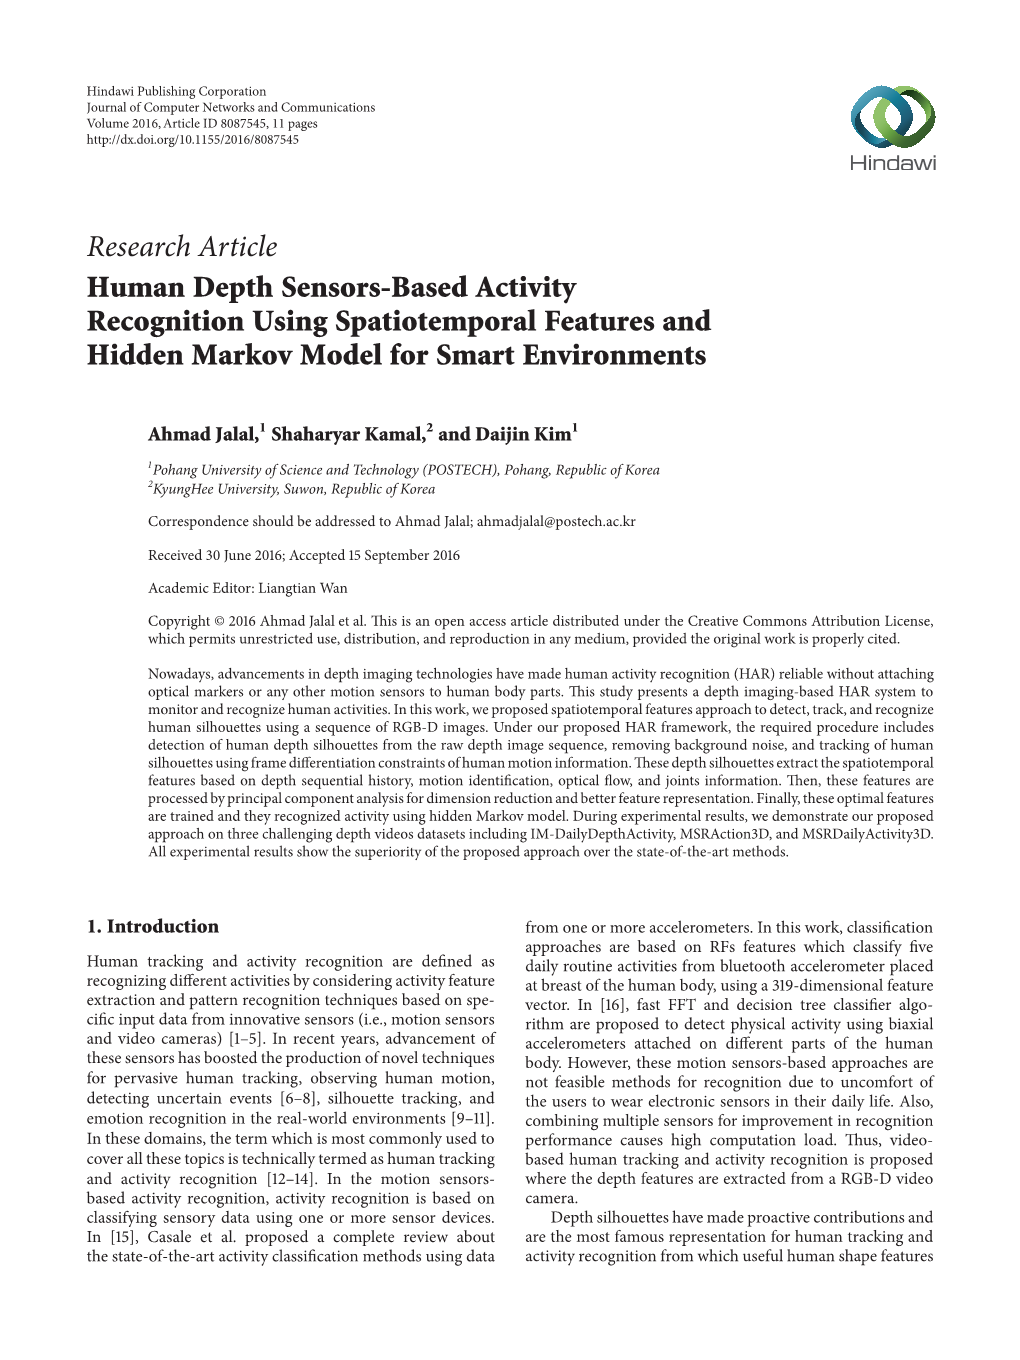 Research Article Human Depth Sensors-Based Activity Recognition Using Spatiotemporal Features and Hidden Markov Model for Smart Environments